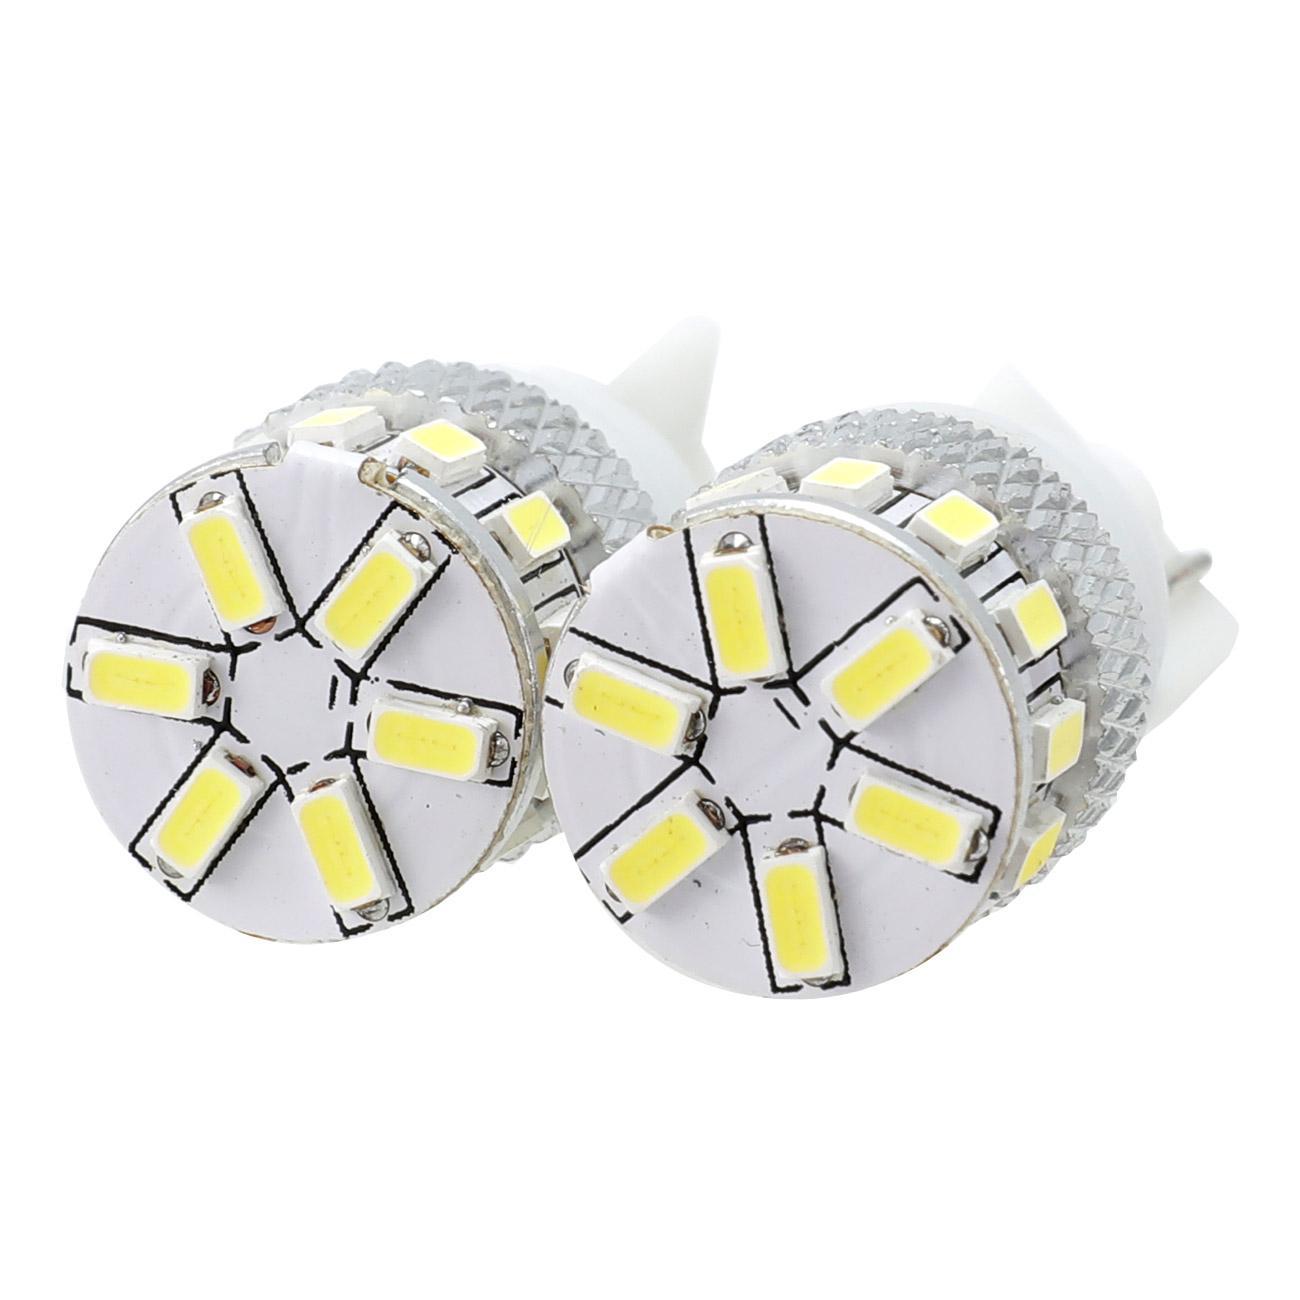 PA LED 10PCS Auto T10 194 168 Purple LED Light Bulb 12V 5SMD 5050 Current  Fixed for Interior Map Dome Instrument Panel Trunk Backup License Plate Lamp